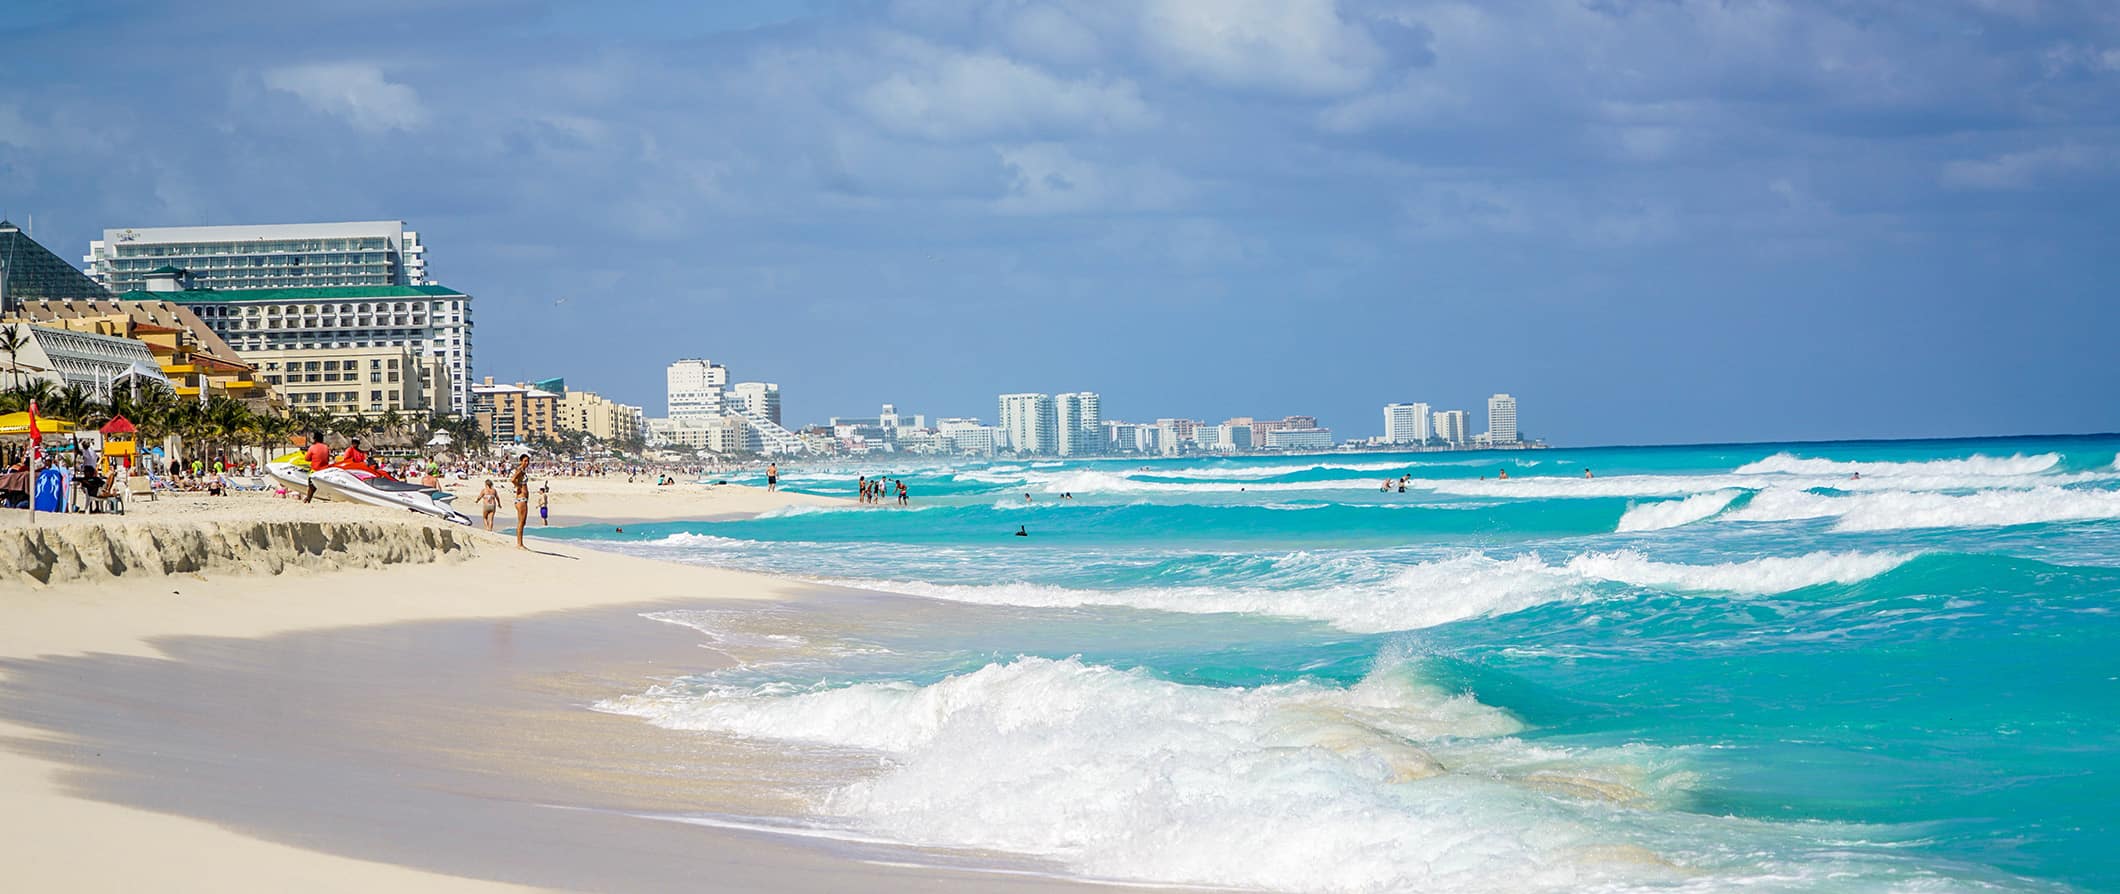 A row of resorts along the gorgeous white-sand beach in Cancun, Mexico with people enjoying the sunshine